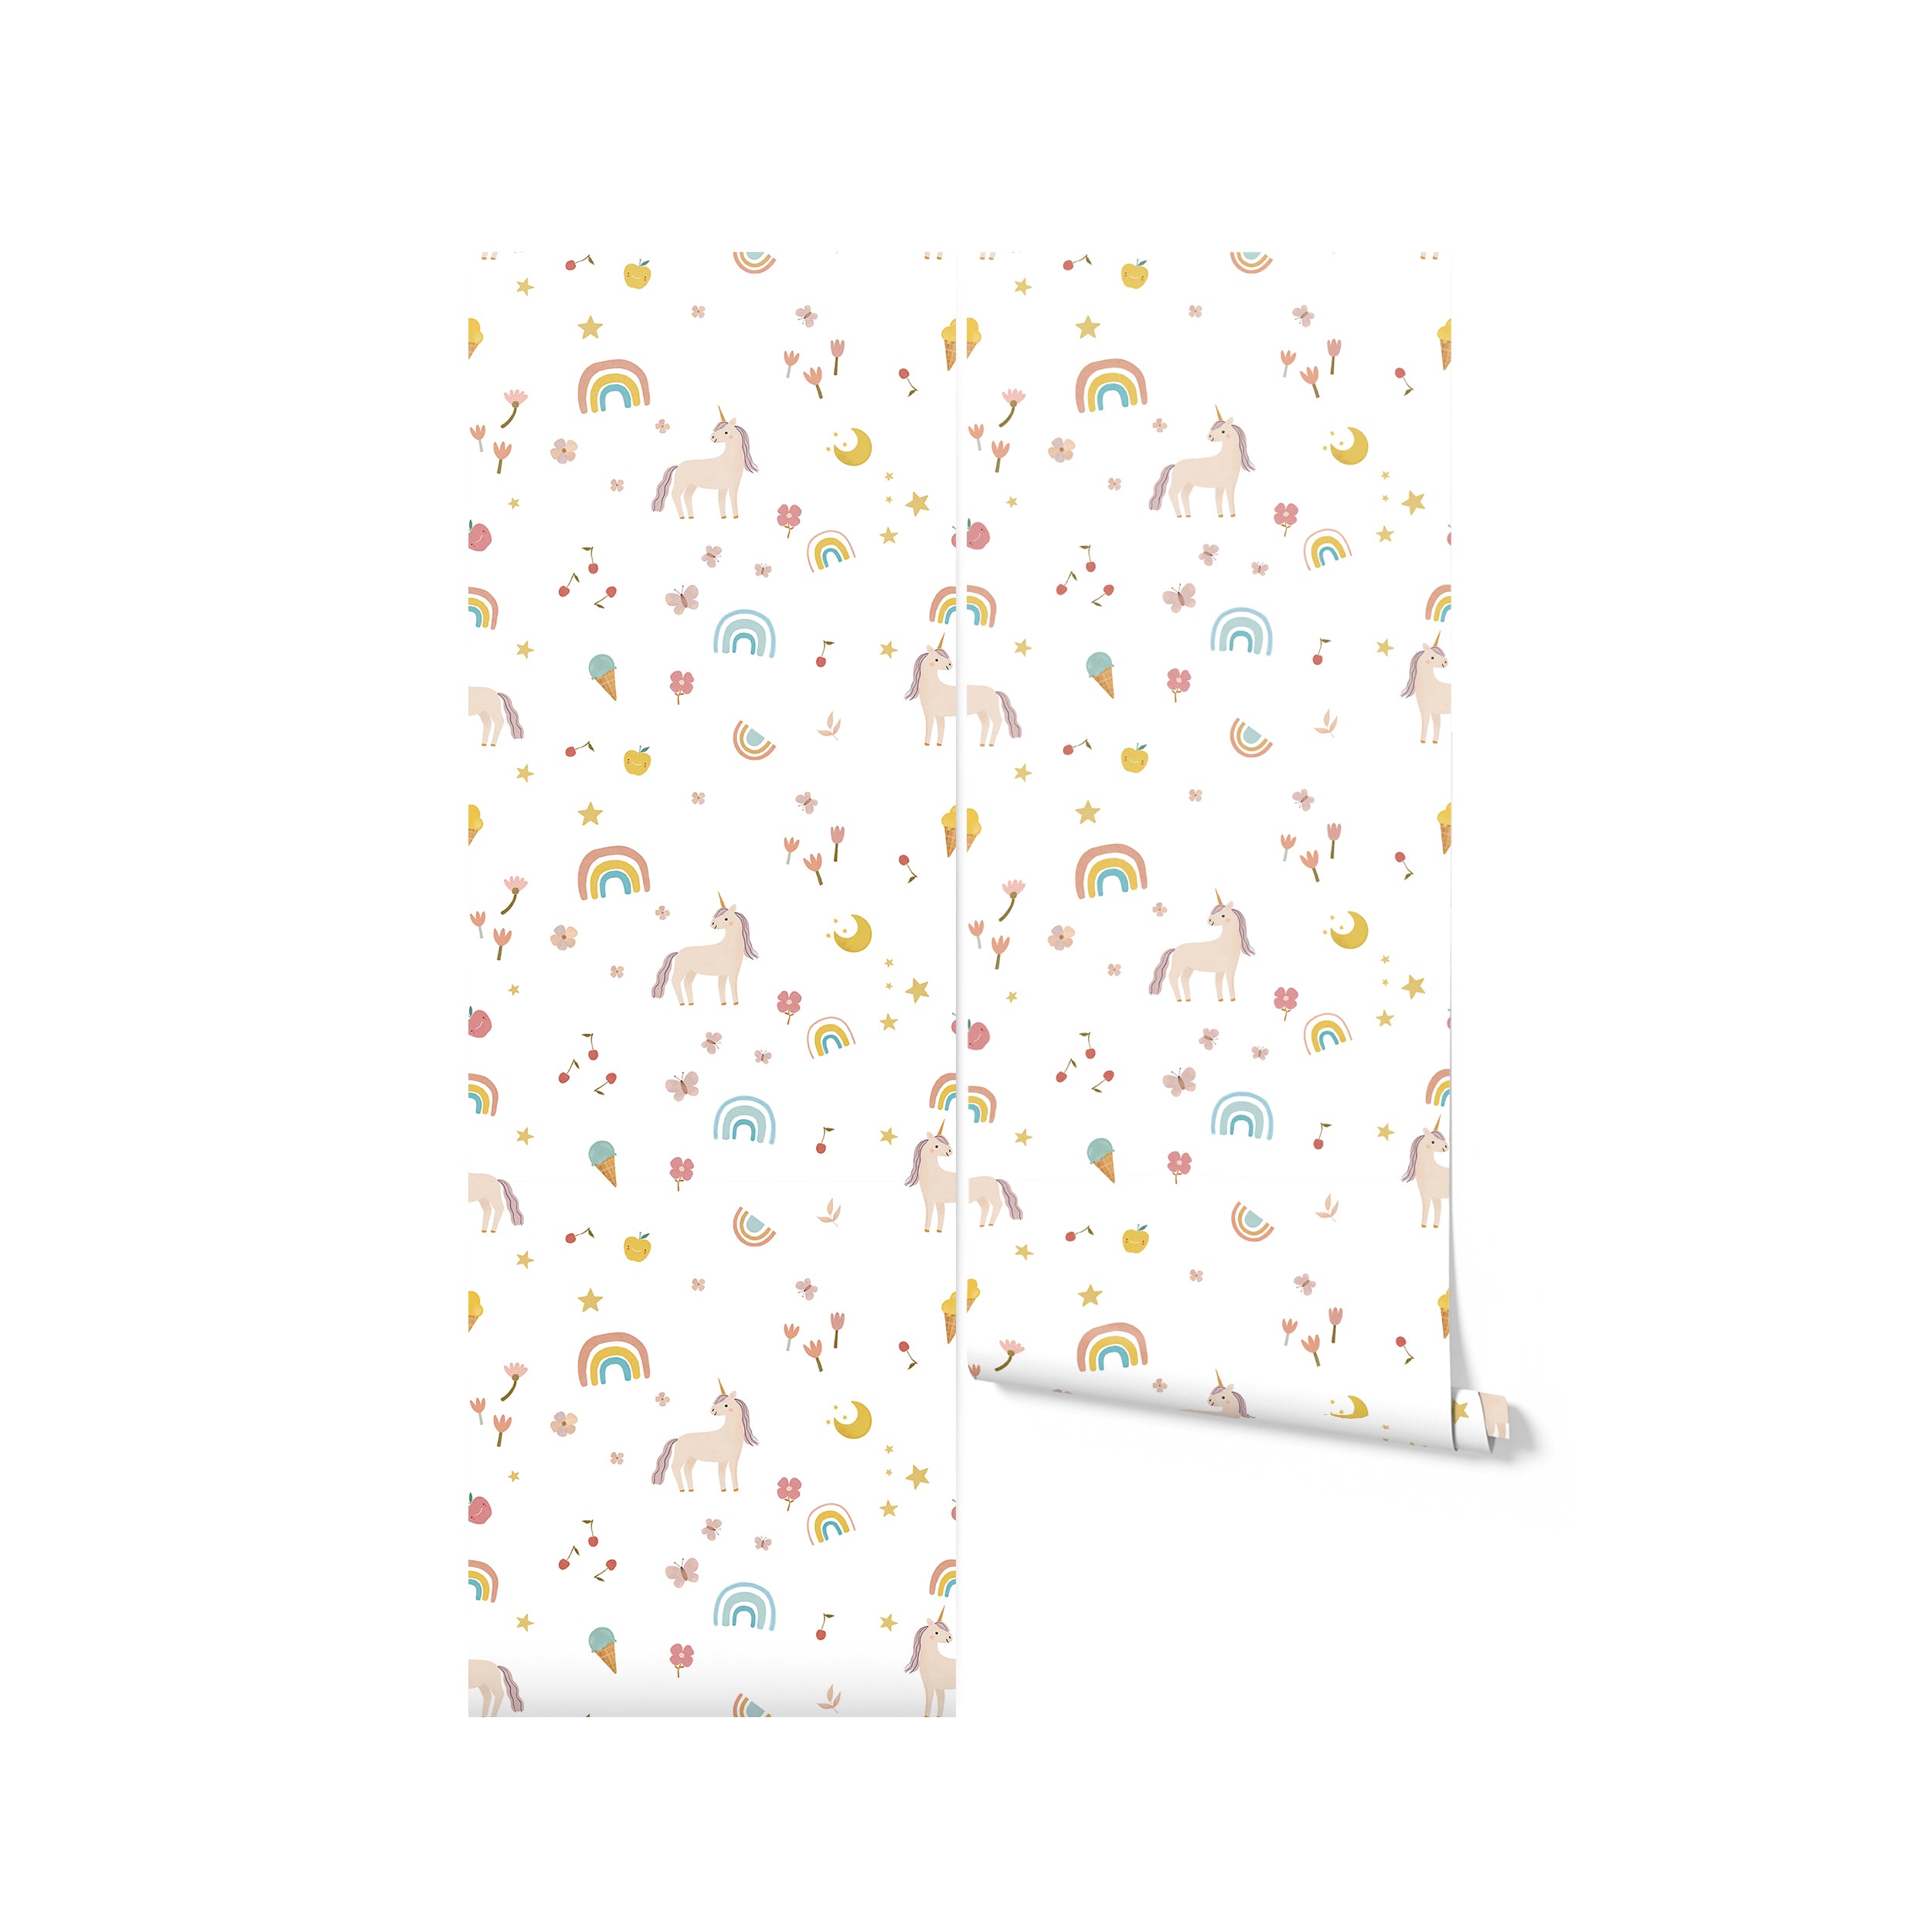 Rolls of Unicorn Adventure Wallpaper showcasing its charming design with unicorns, rainbows, ice cream cones, stars, and flowers in soft pastel colors, perfect for creating a magical and playful atmosphere.